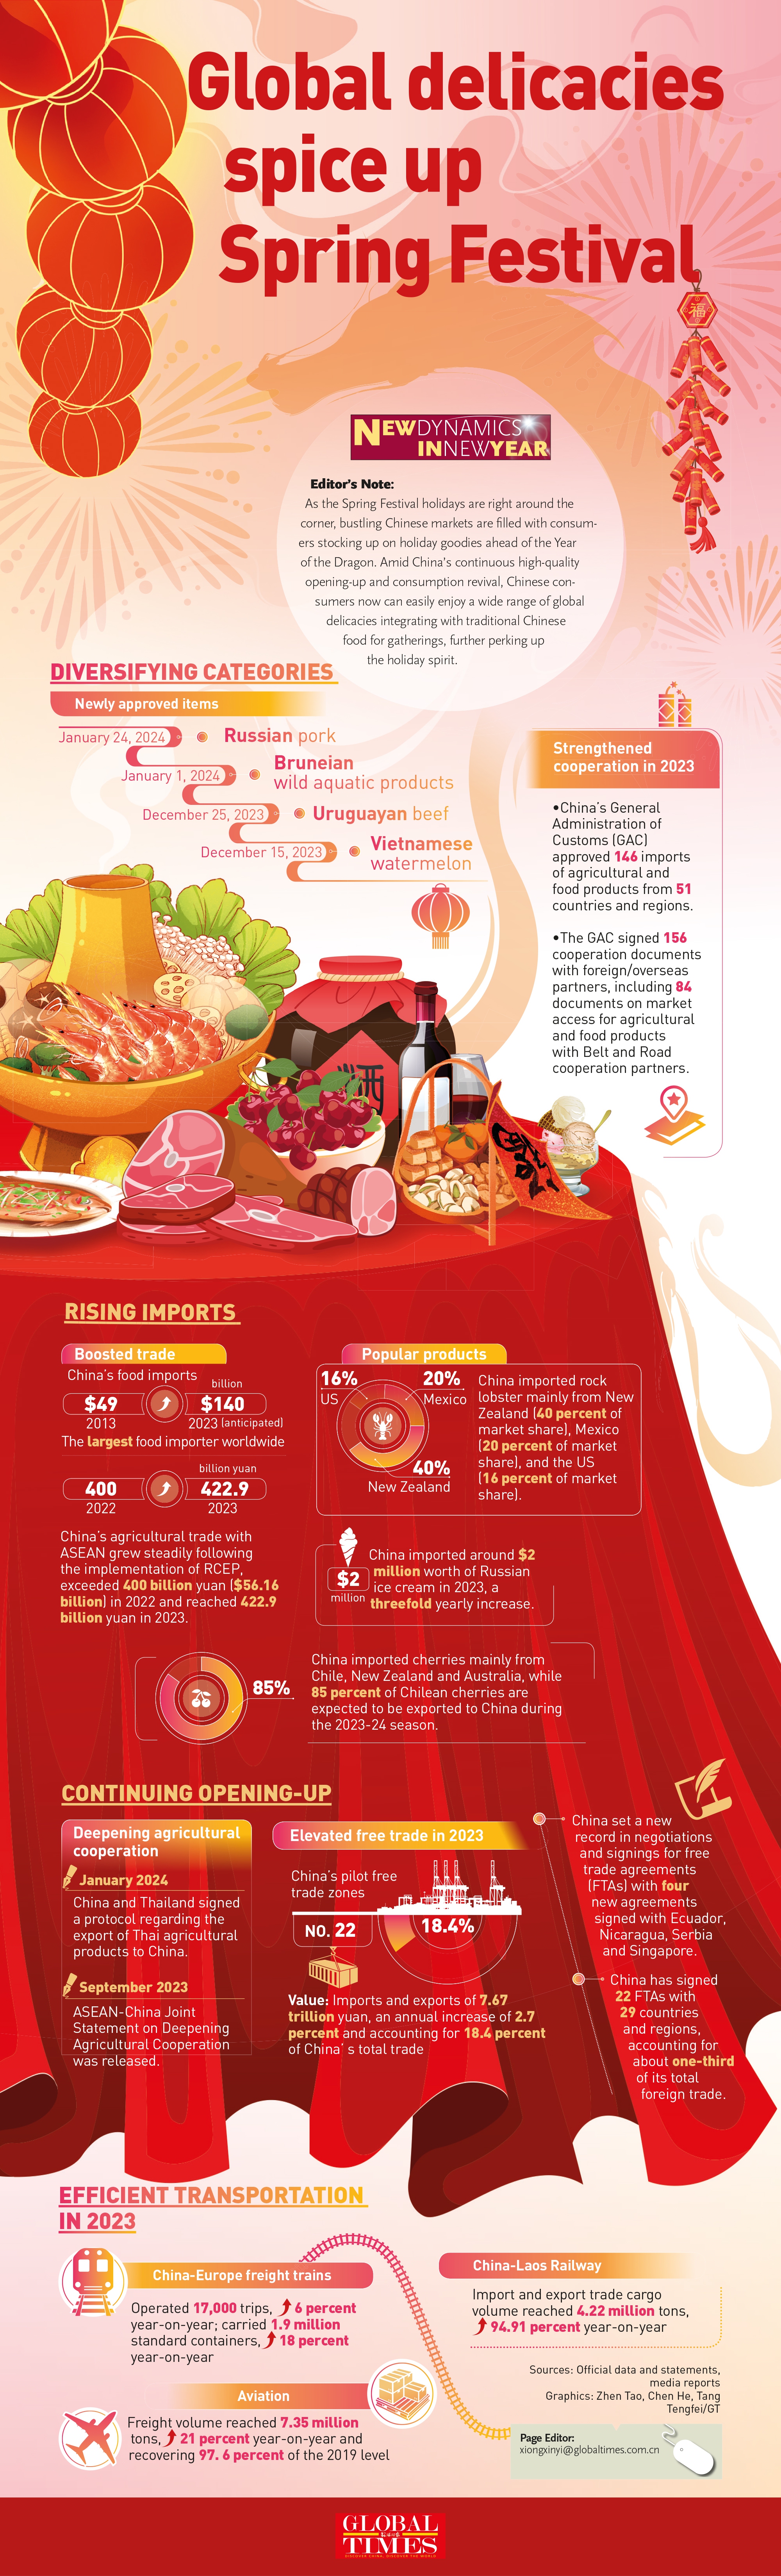 GraphicAnalyasis: Global delicacies spice up Spring Festival amid holiday consumption boom